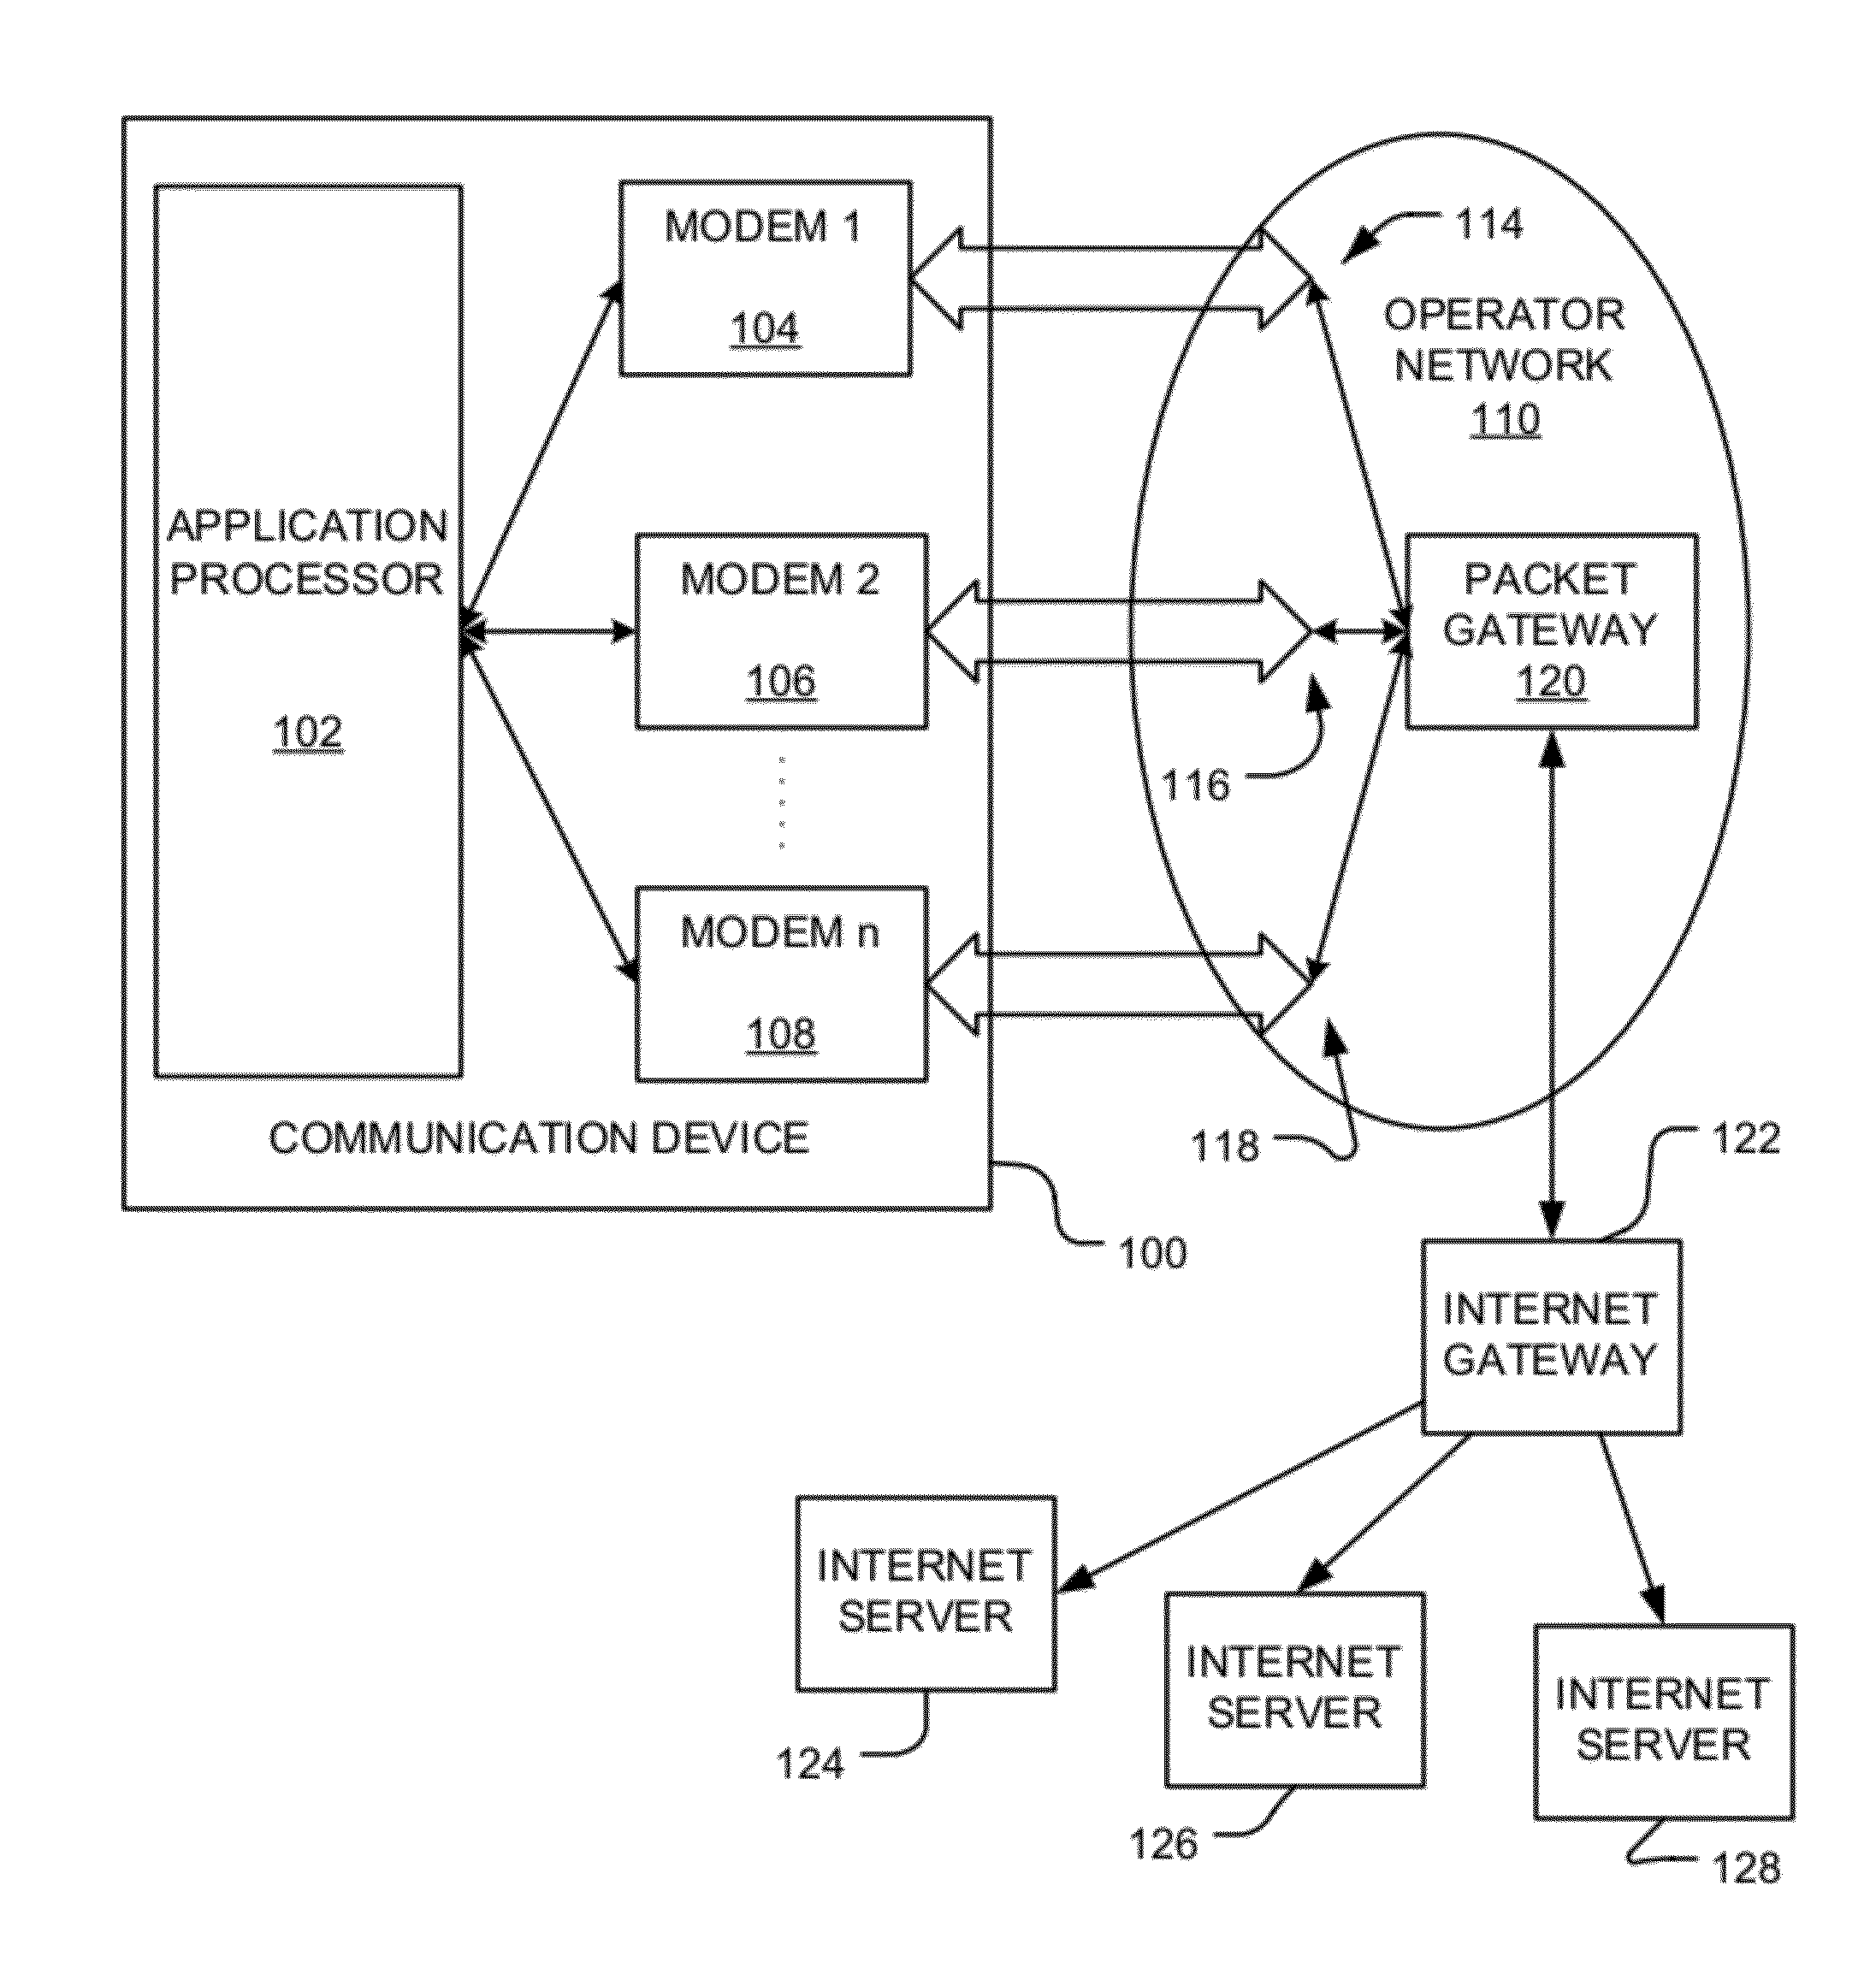 Aggregating multiple radio links from multiple modems in a communication device